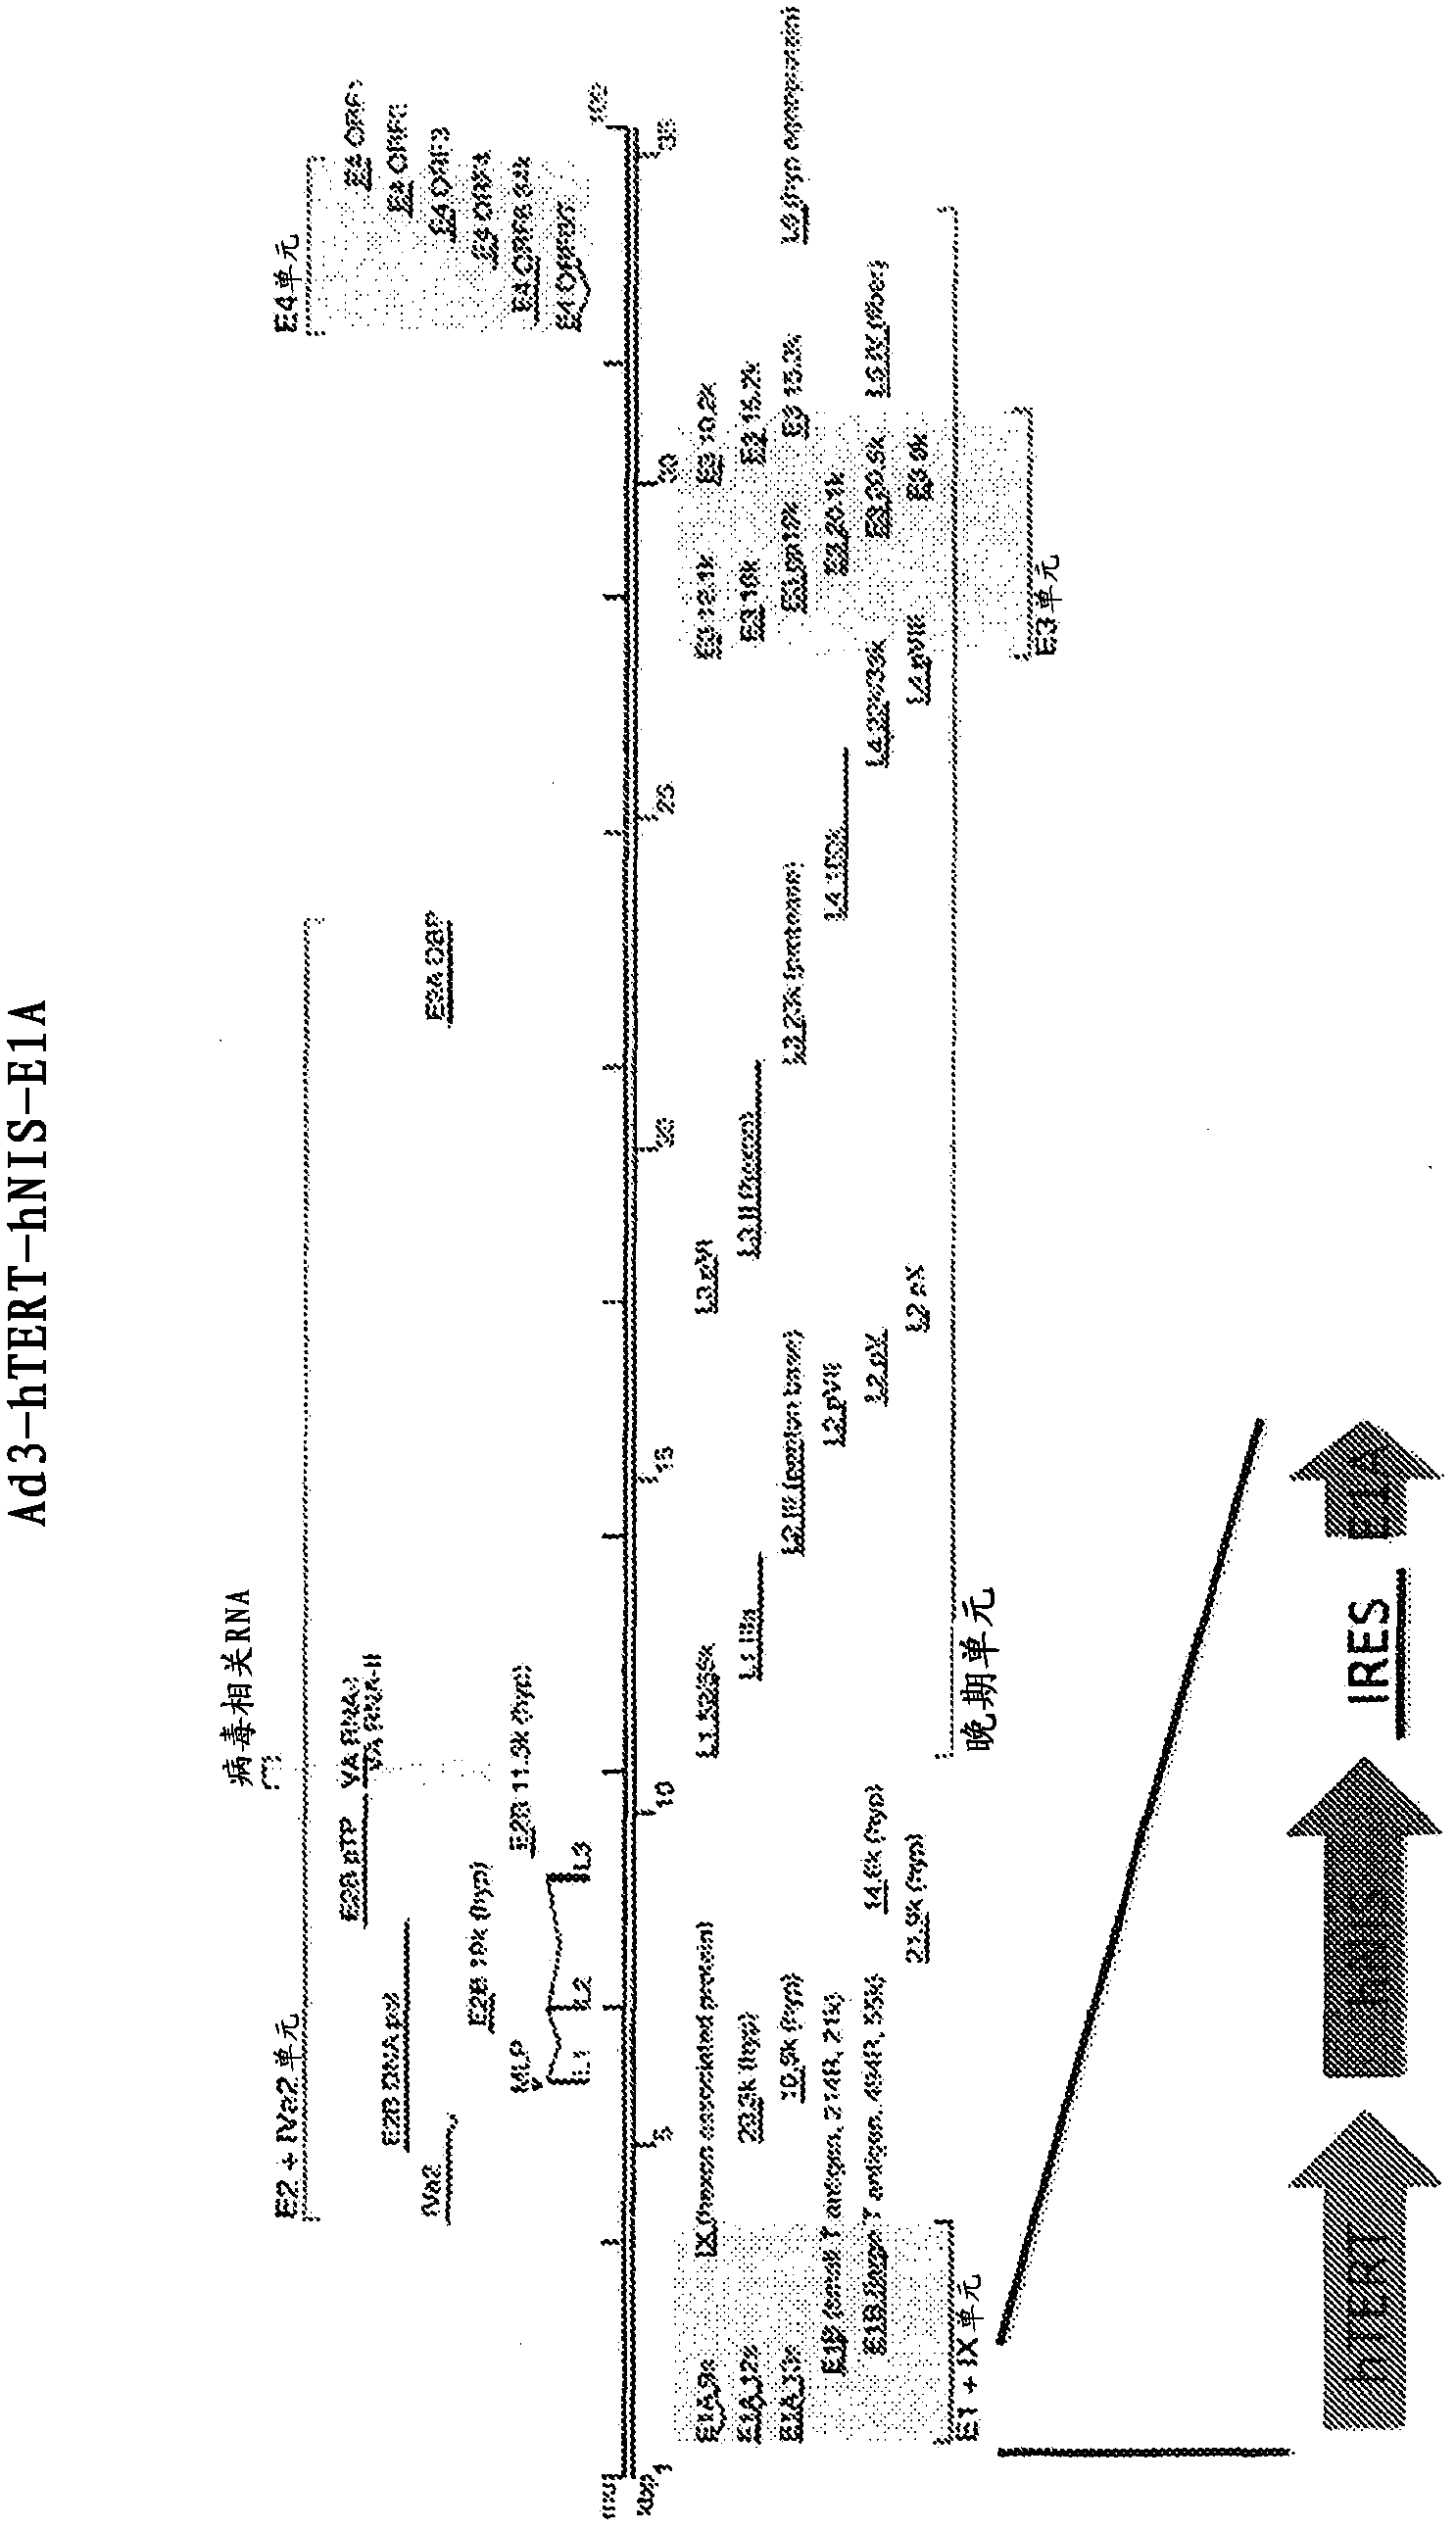 Non-ad5 adenoviral vectors and methods and uses related thereto